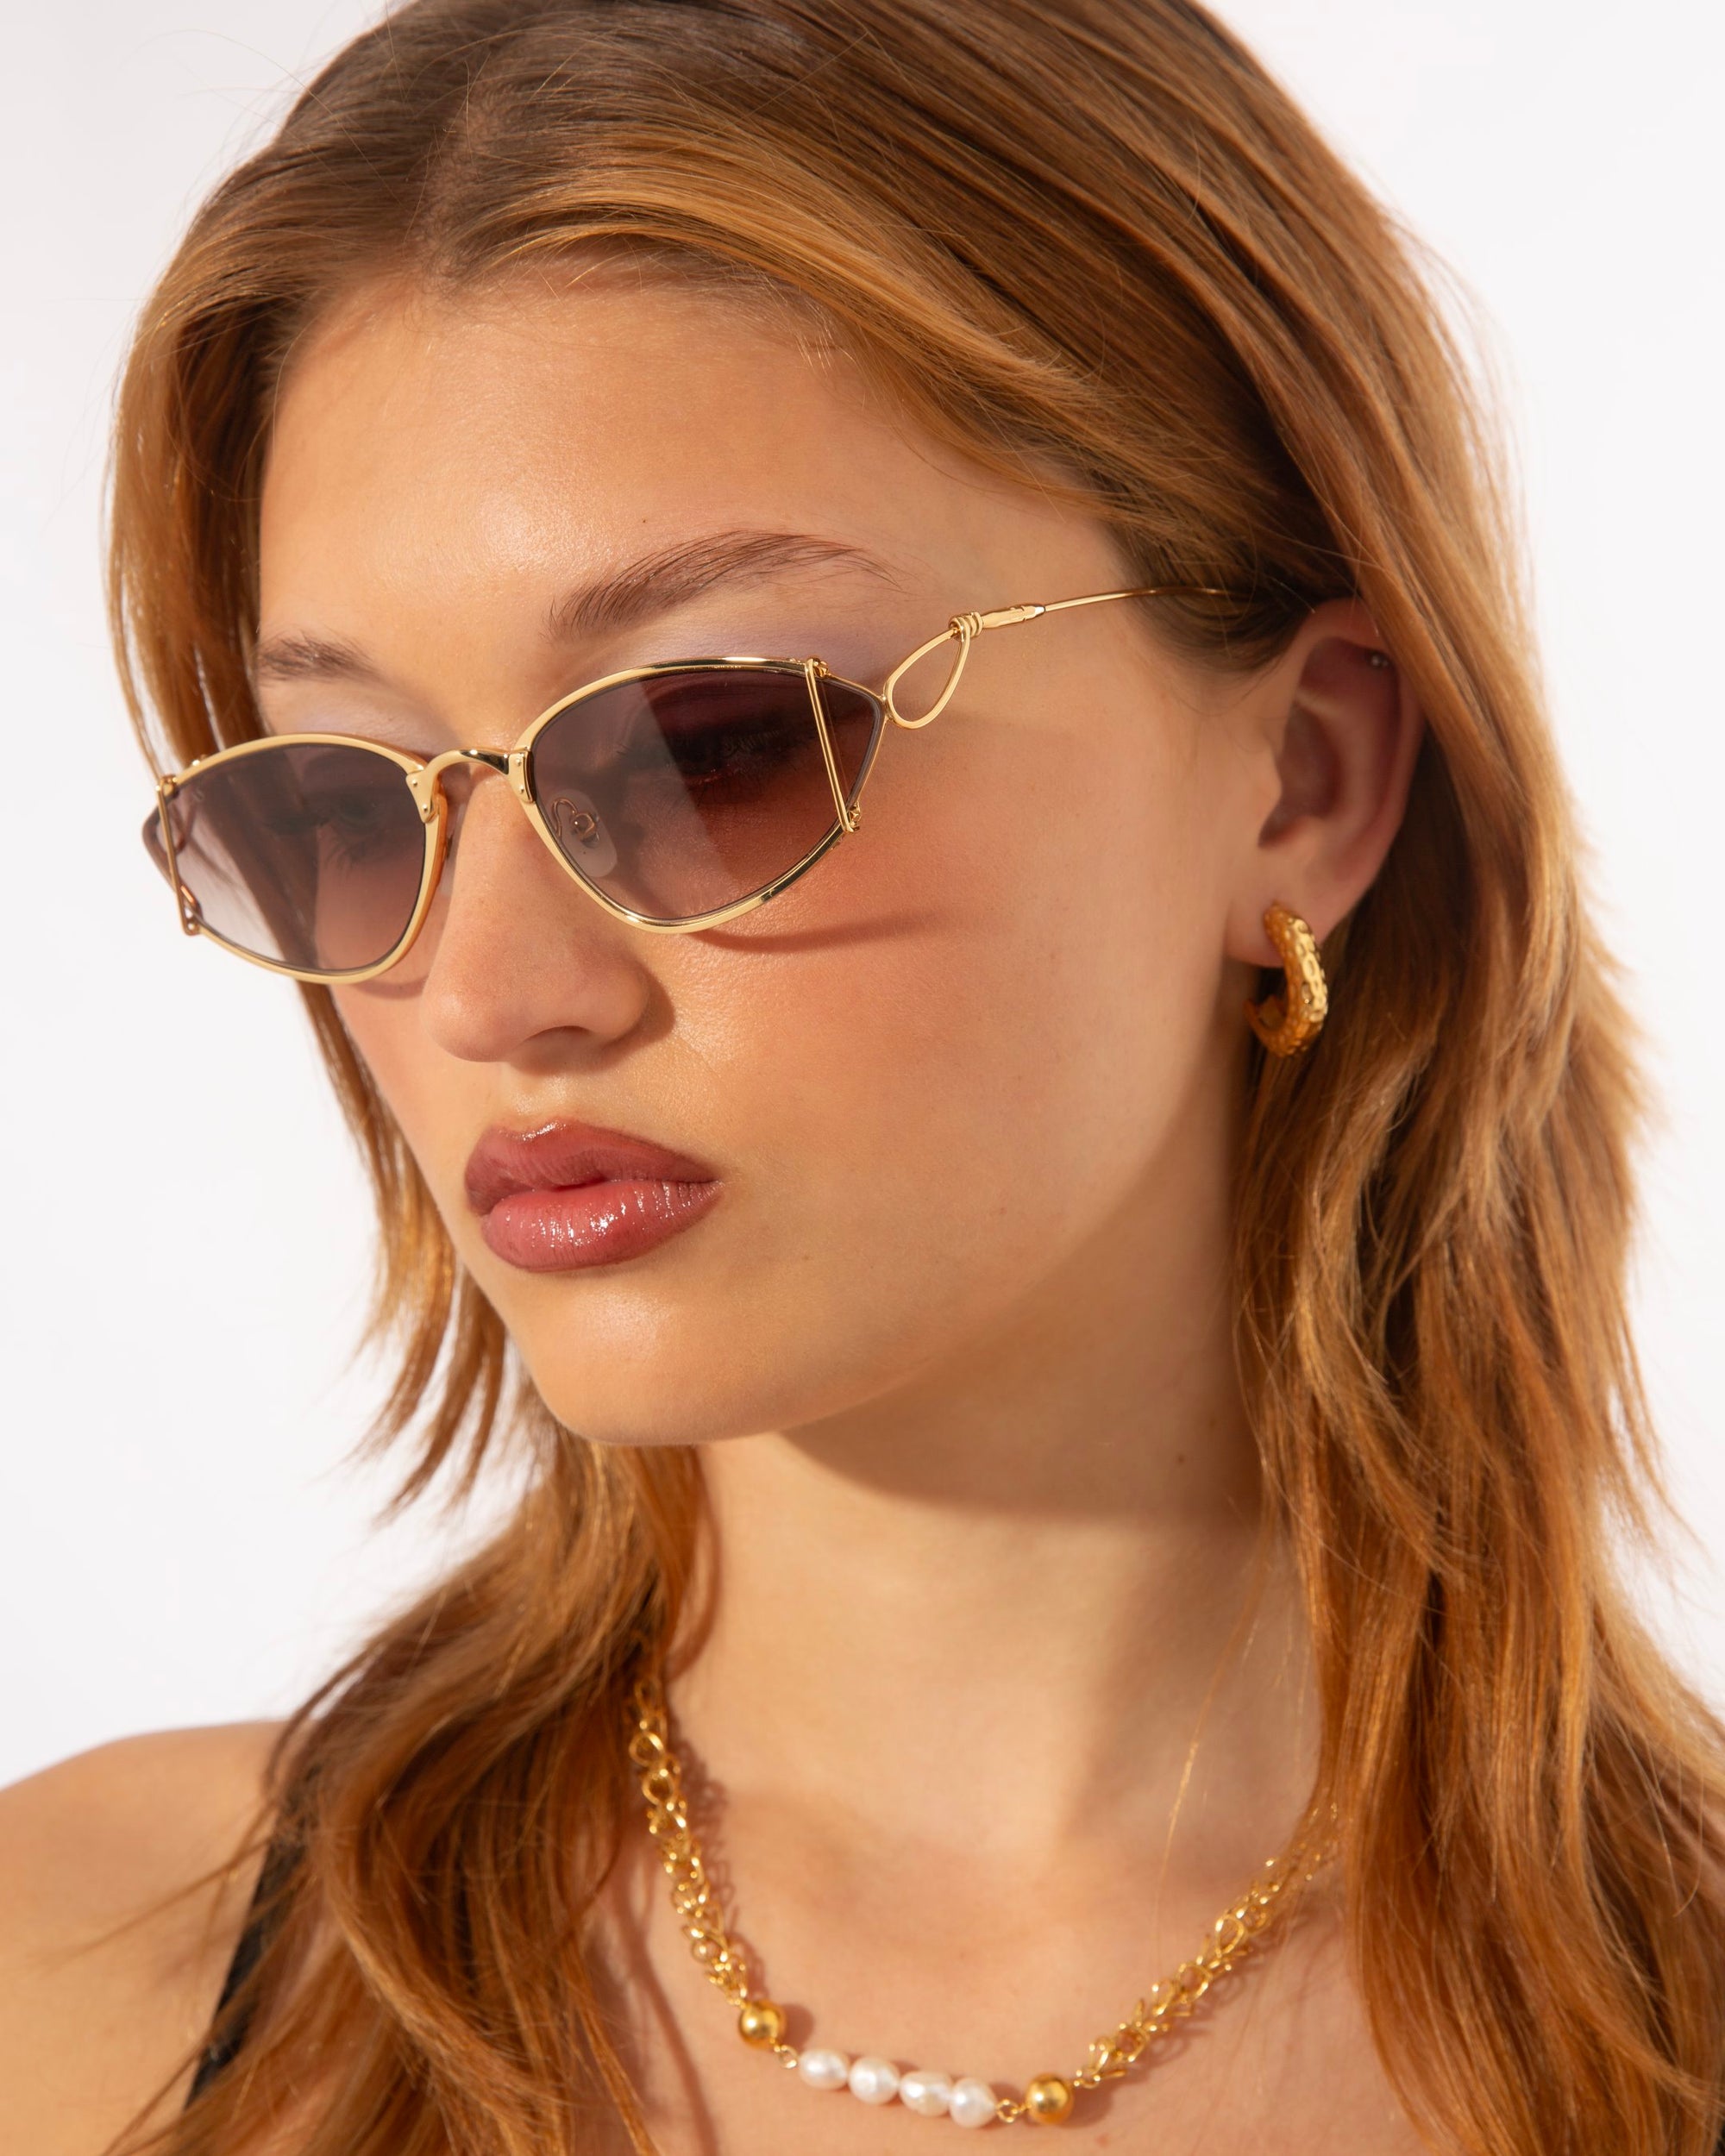 A person with shoulder-length light brown hair wears stylish Ornate sunglasses by For Art's Sake®, a gold hoop earring, and an 18-karat gold-plated necklace accented with pearls. The background is plain white, highlighting the accessories and the person's relaxed expression.